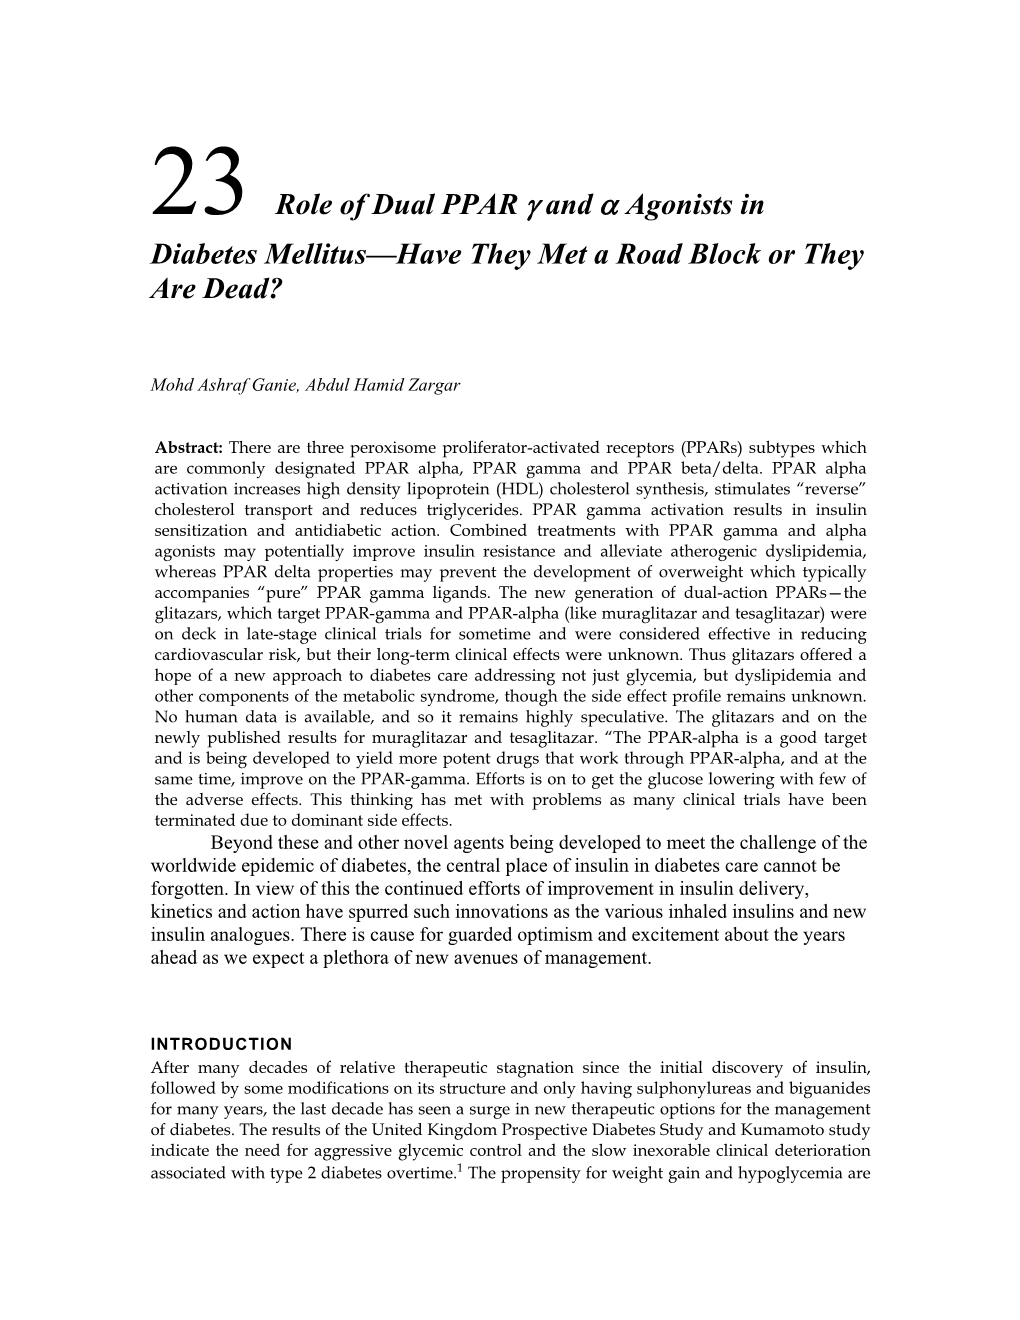 Role of Dual PPAR Gamma and Alpha Agonists in Diabetes Mellitus